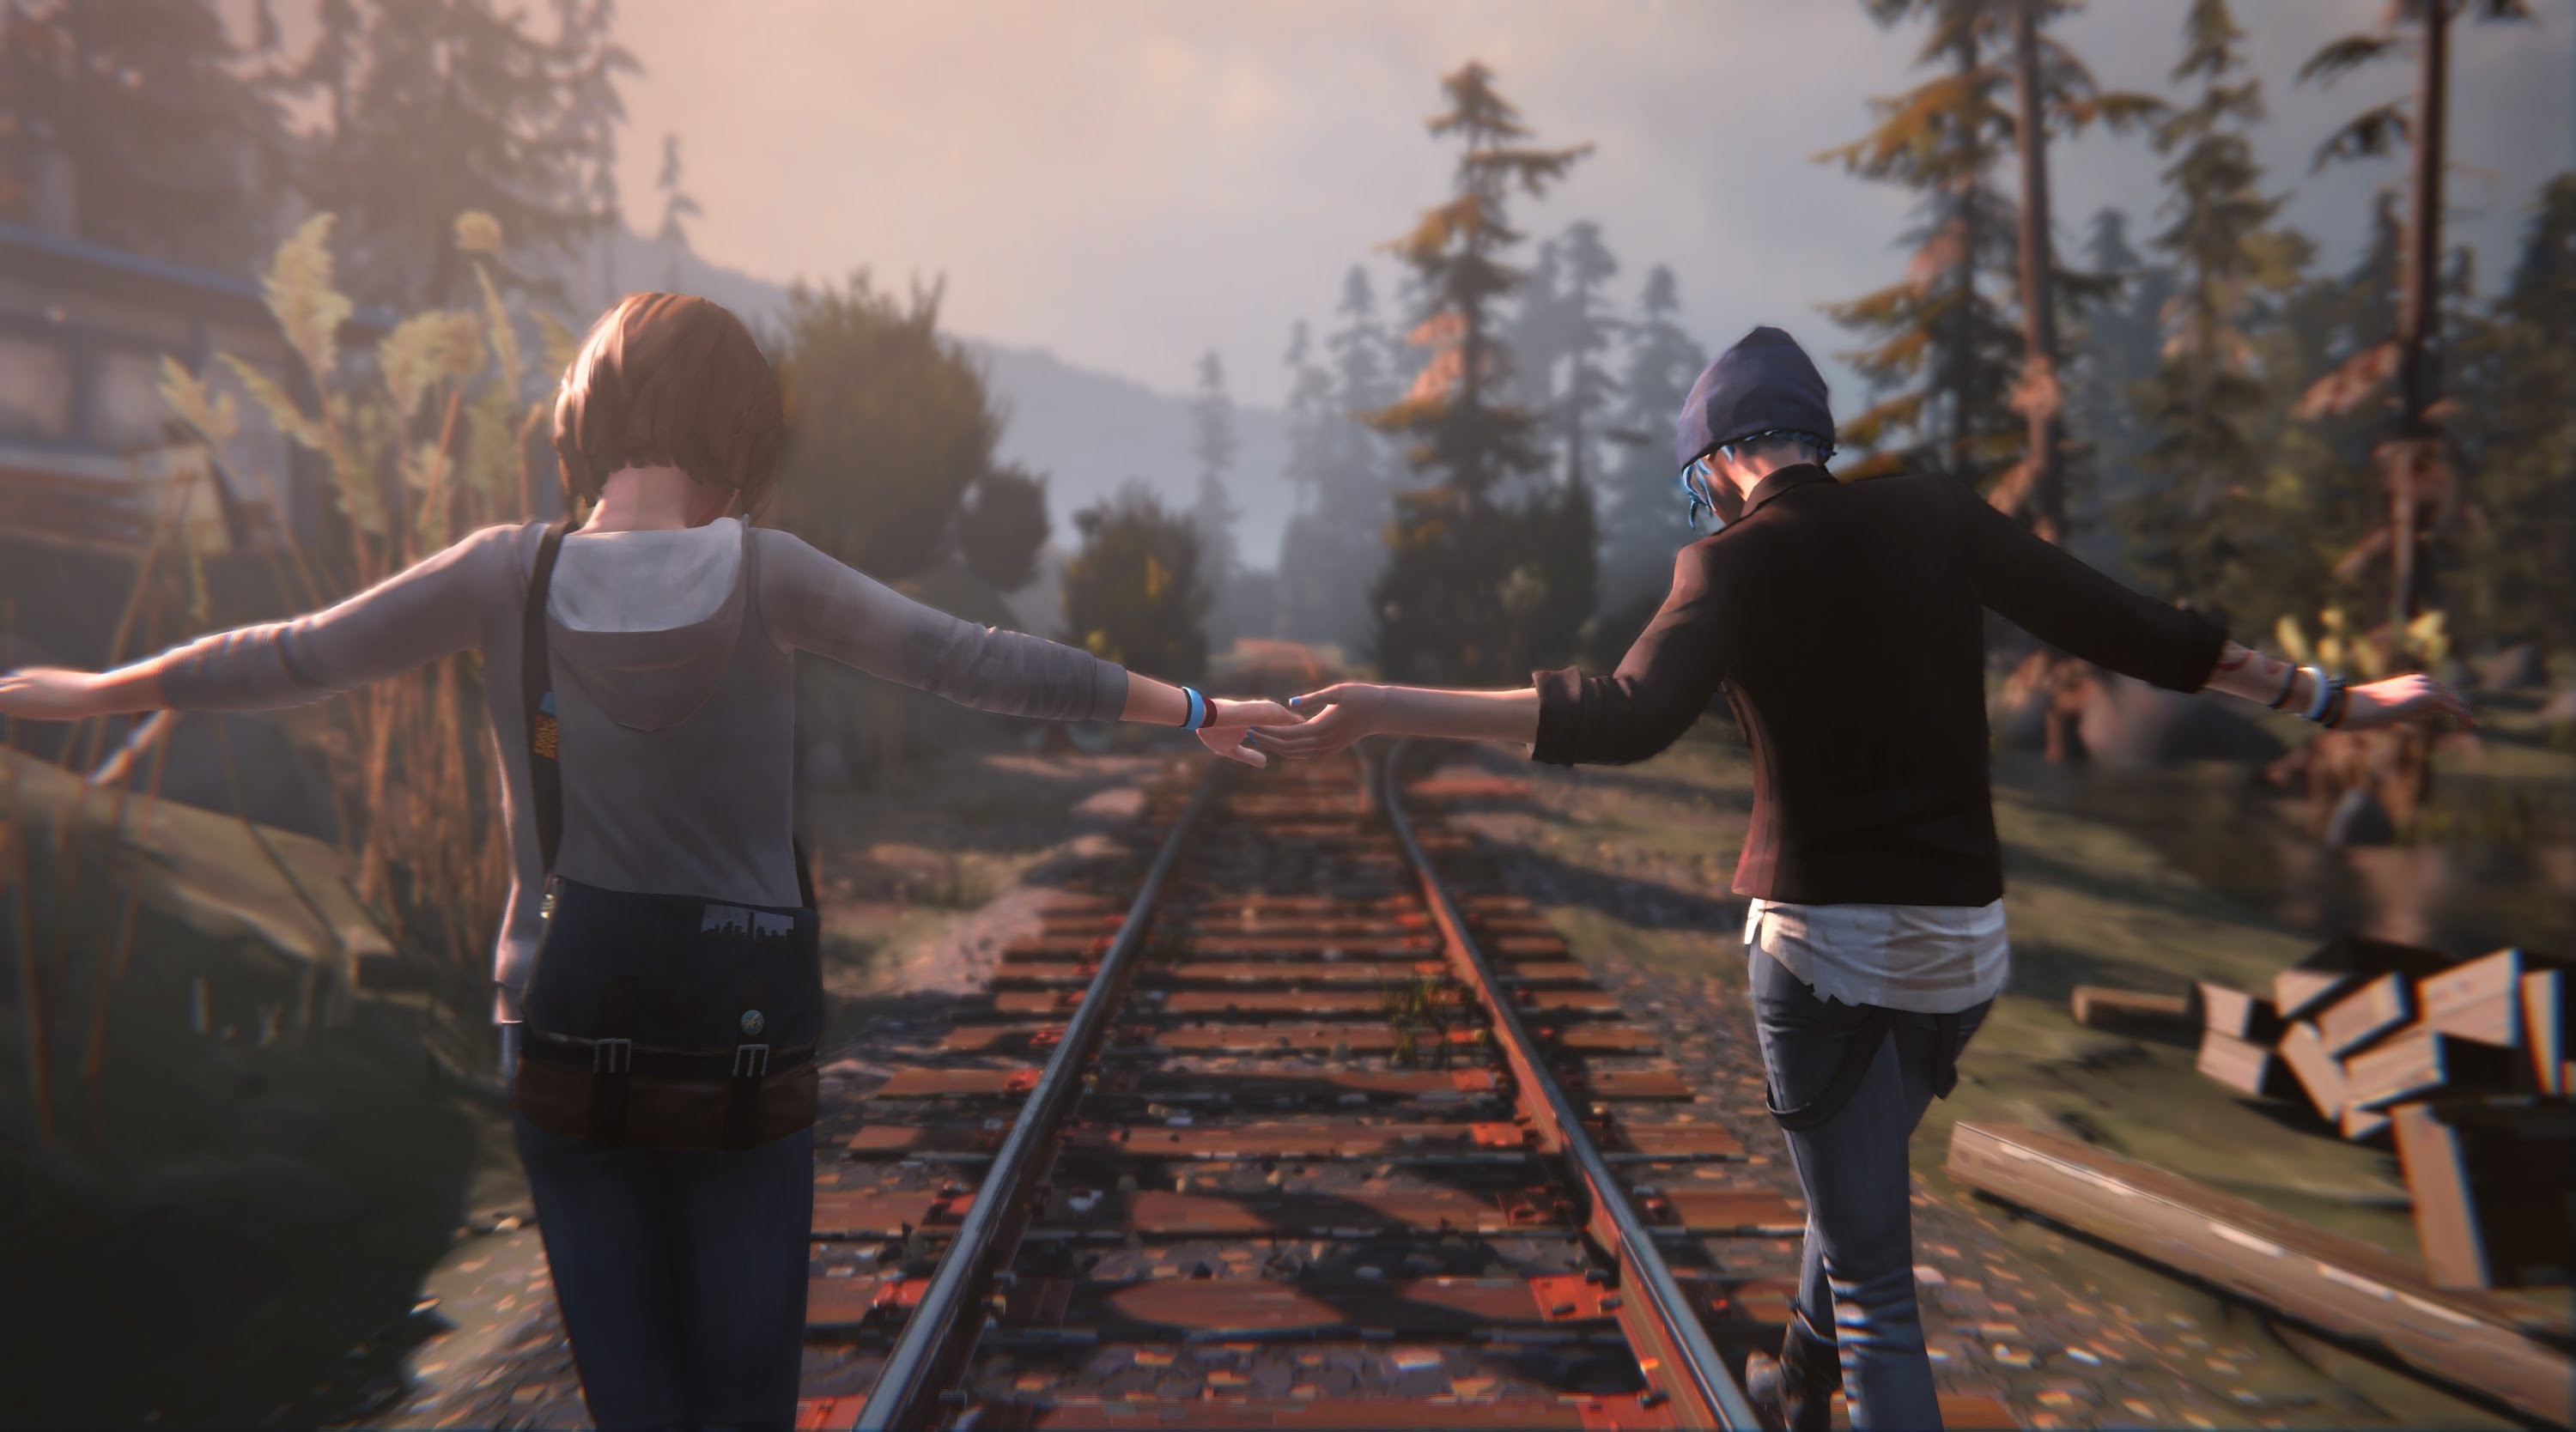 download life is strange new game for free